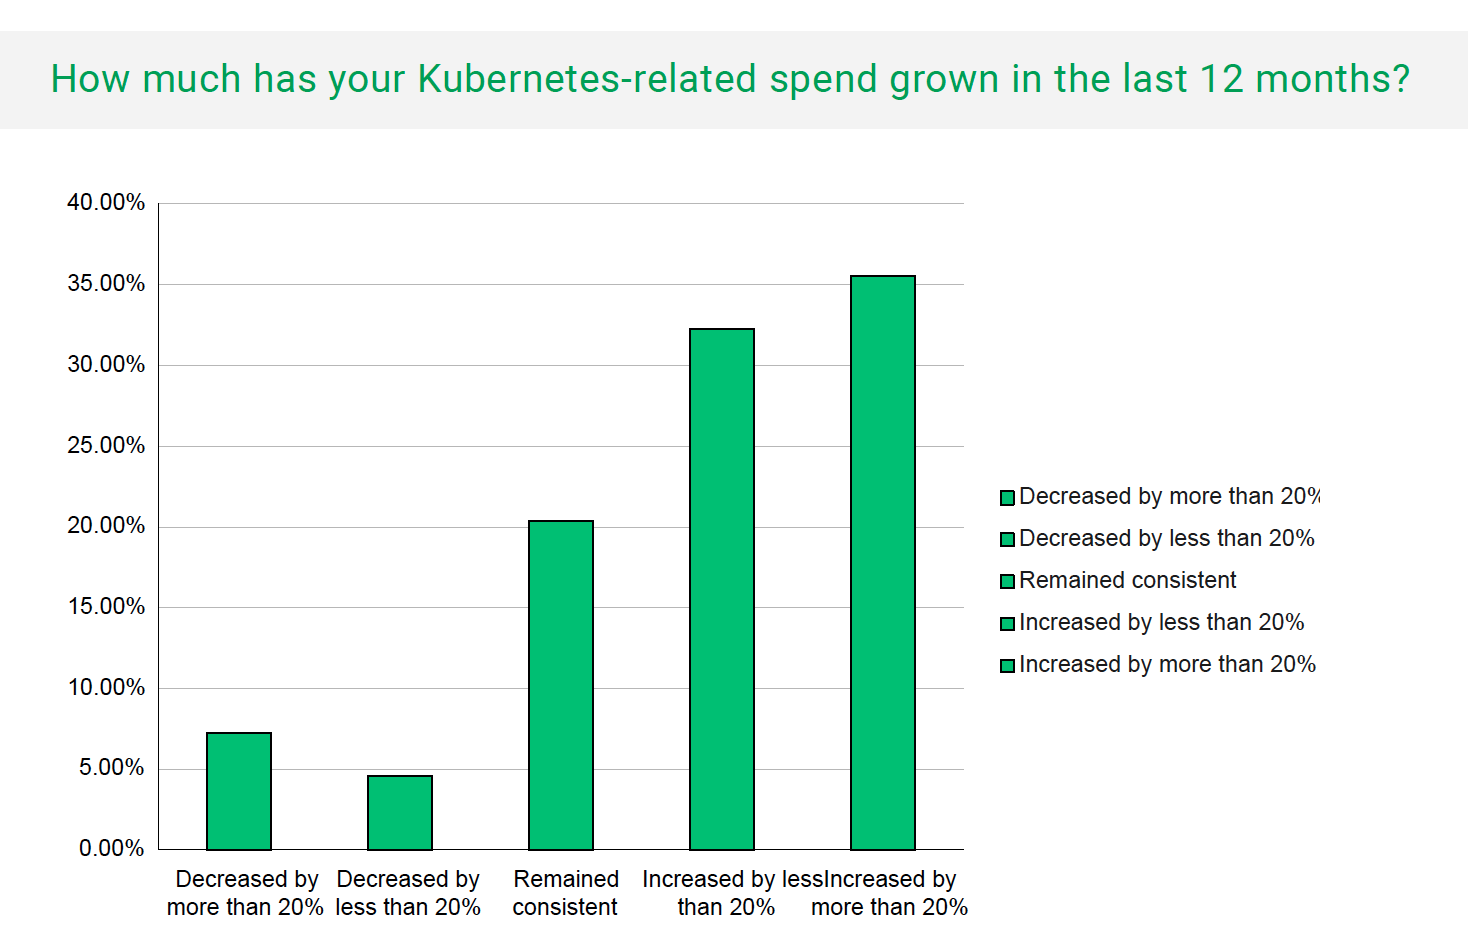 Bar chart shows around 8% respondents of Kubernetes-related spend grown in the last 12 months decreased by more than 20%, around 4% decreased by less than 20%, around 21% remained consistent, around 32% increased by less than 20% and around 36% increased by more than 20% 